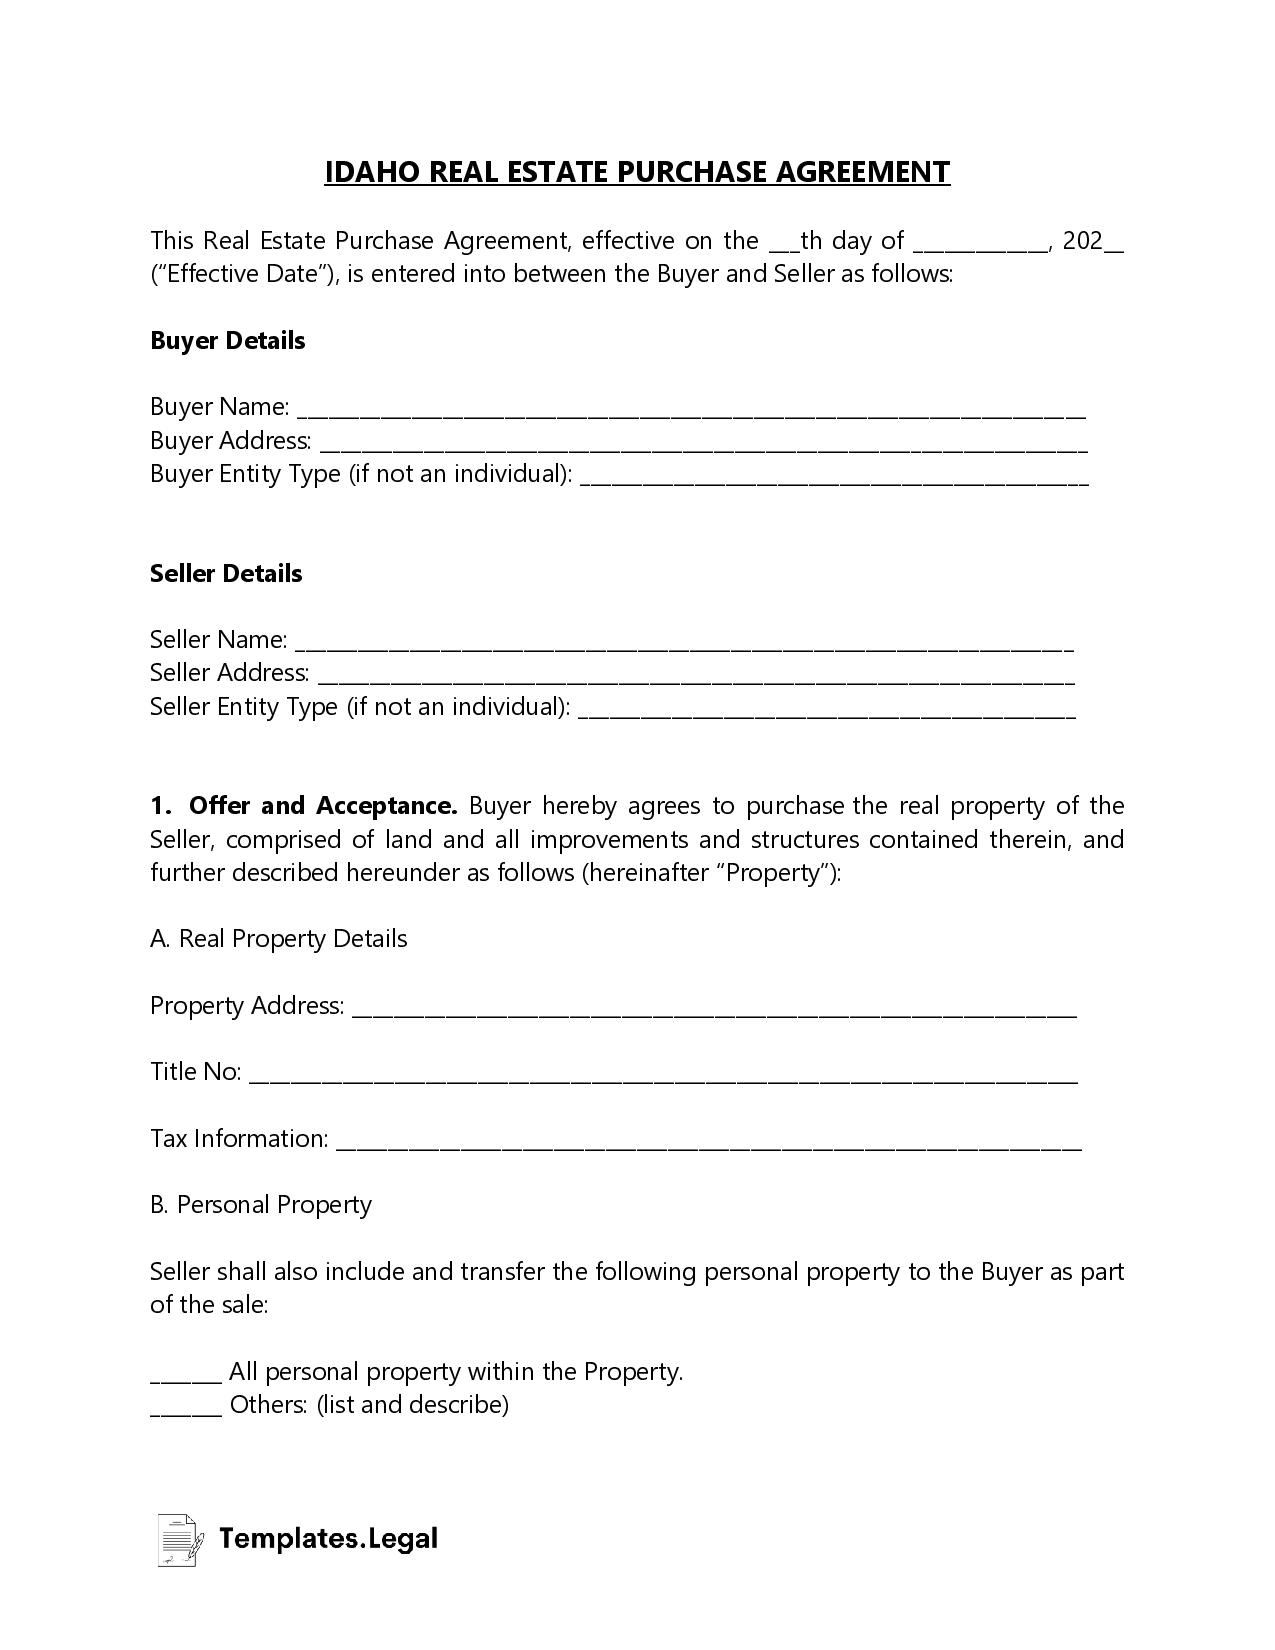 Idaho Real Estate Purchase Agreement - Templates.Legal